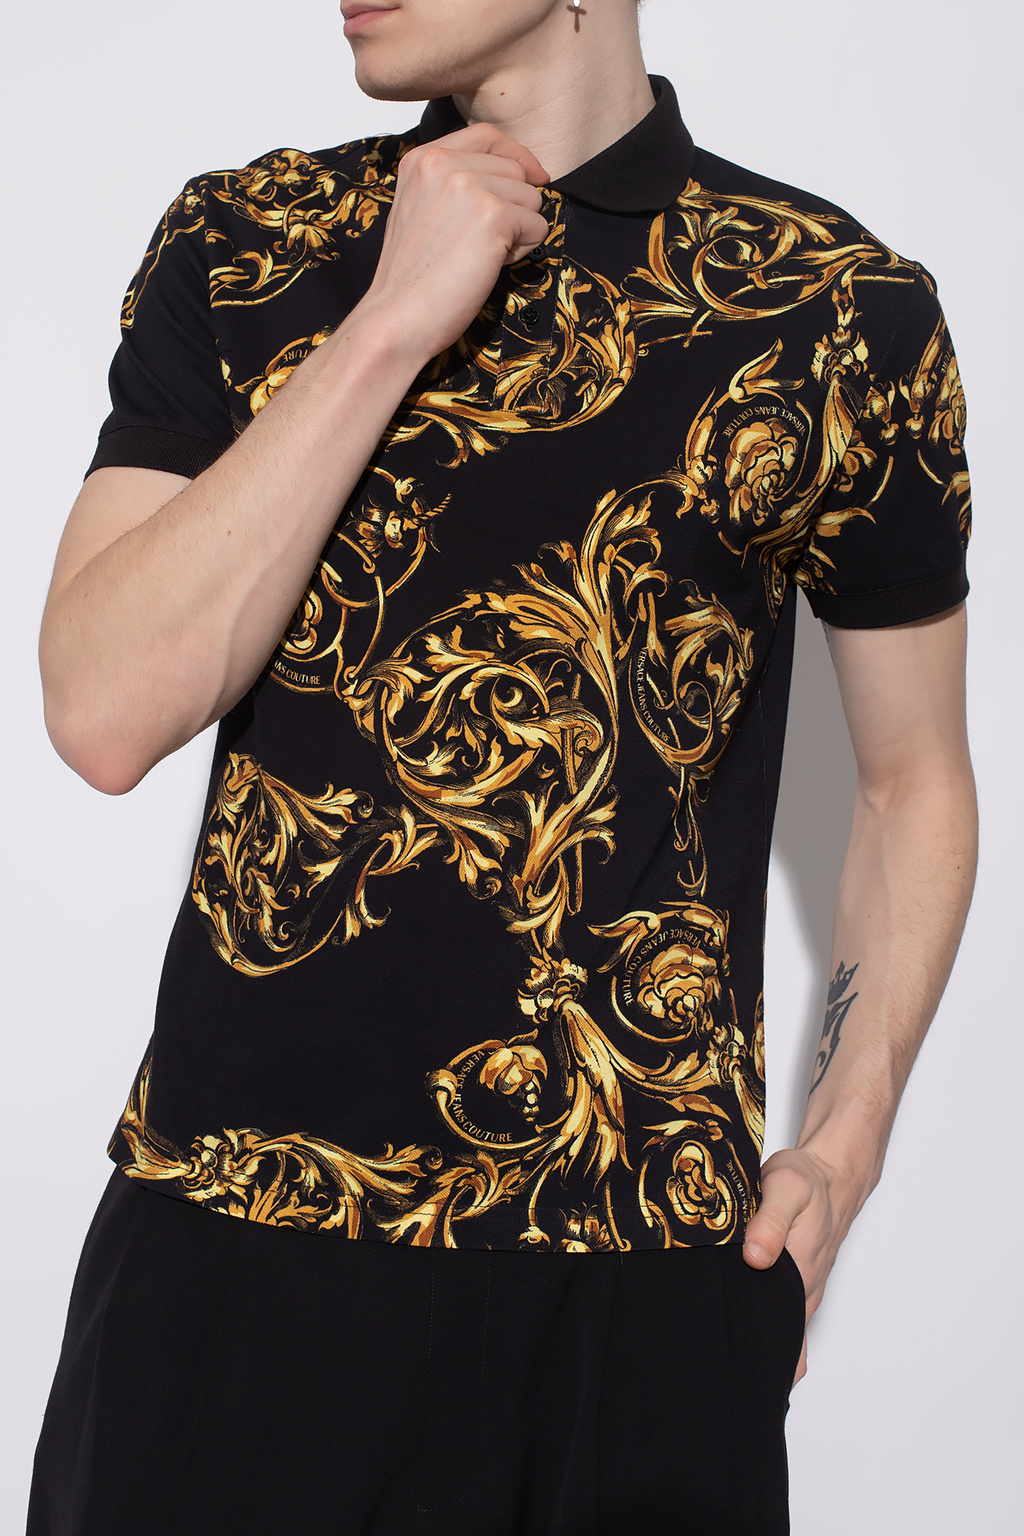 Versace Jeans Couture Barocco-printed polo shirt